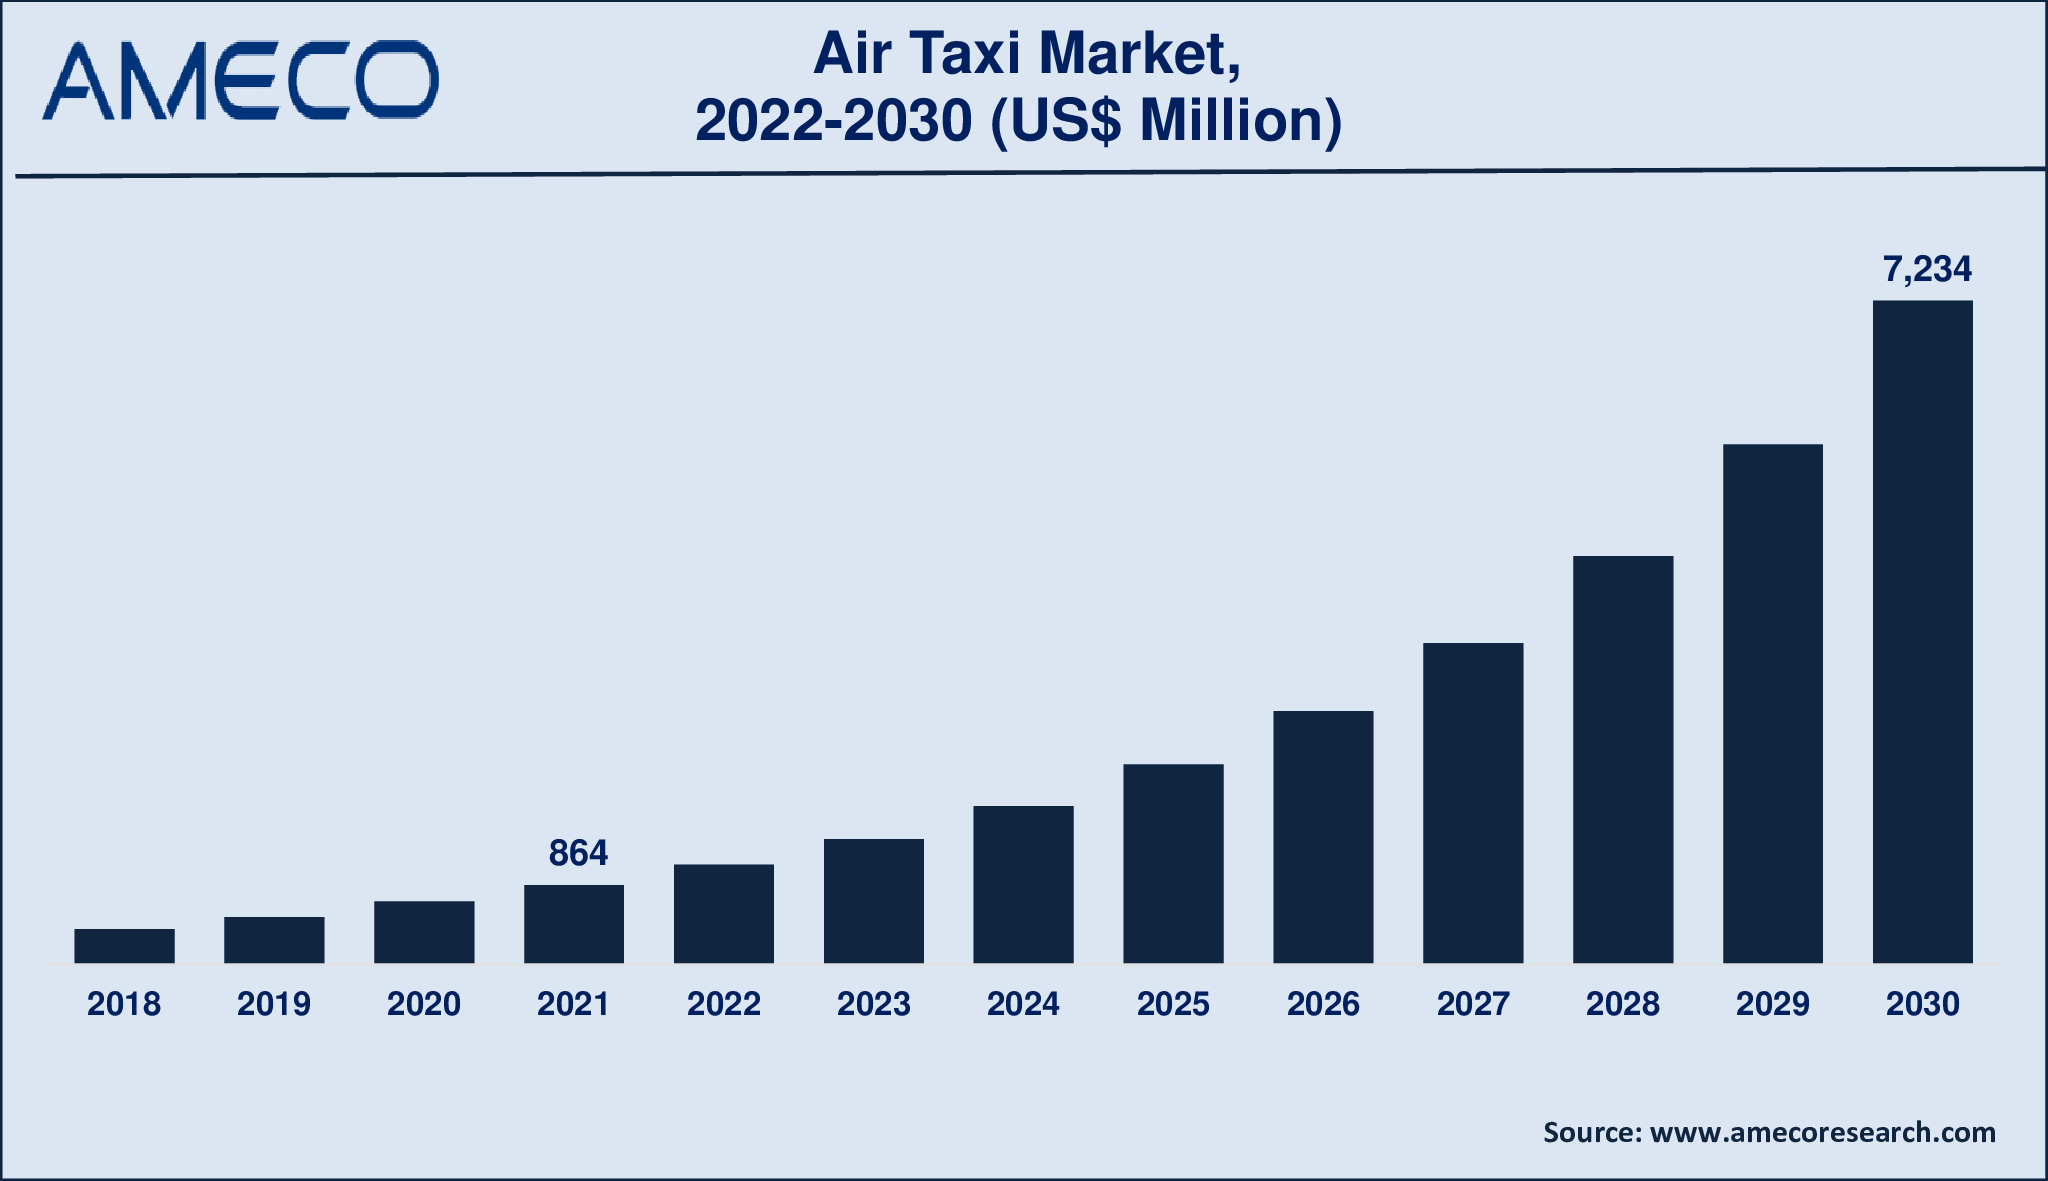 Air Taxi Market Size, Share, Growth, Trends, and Forecast 2022-2030